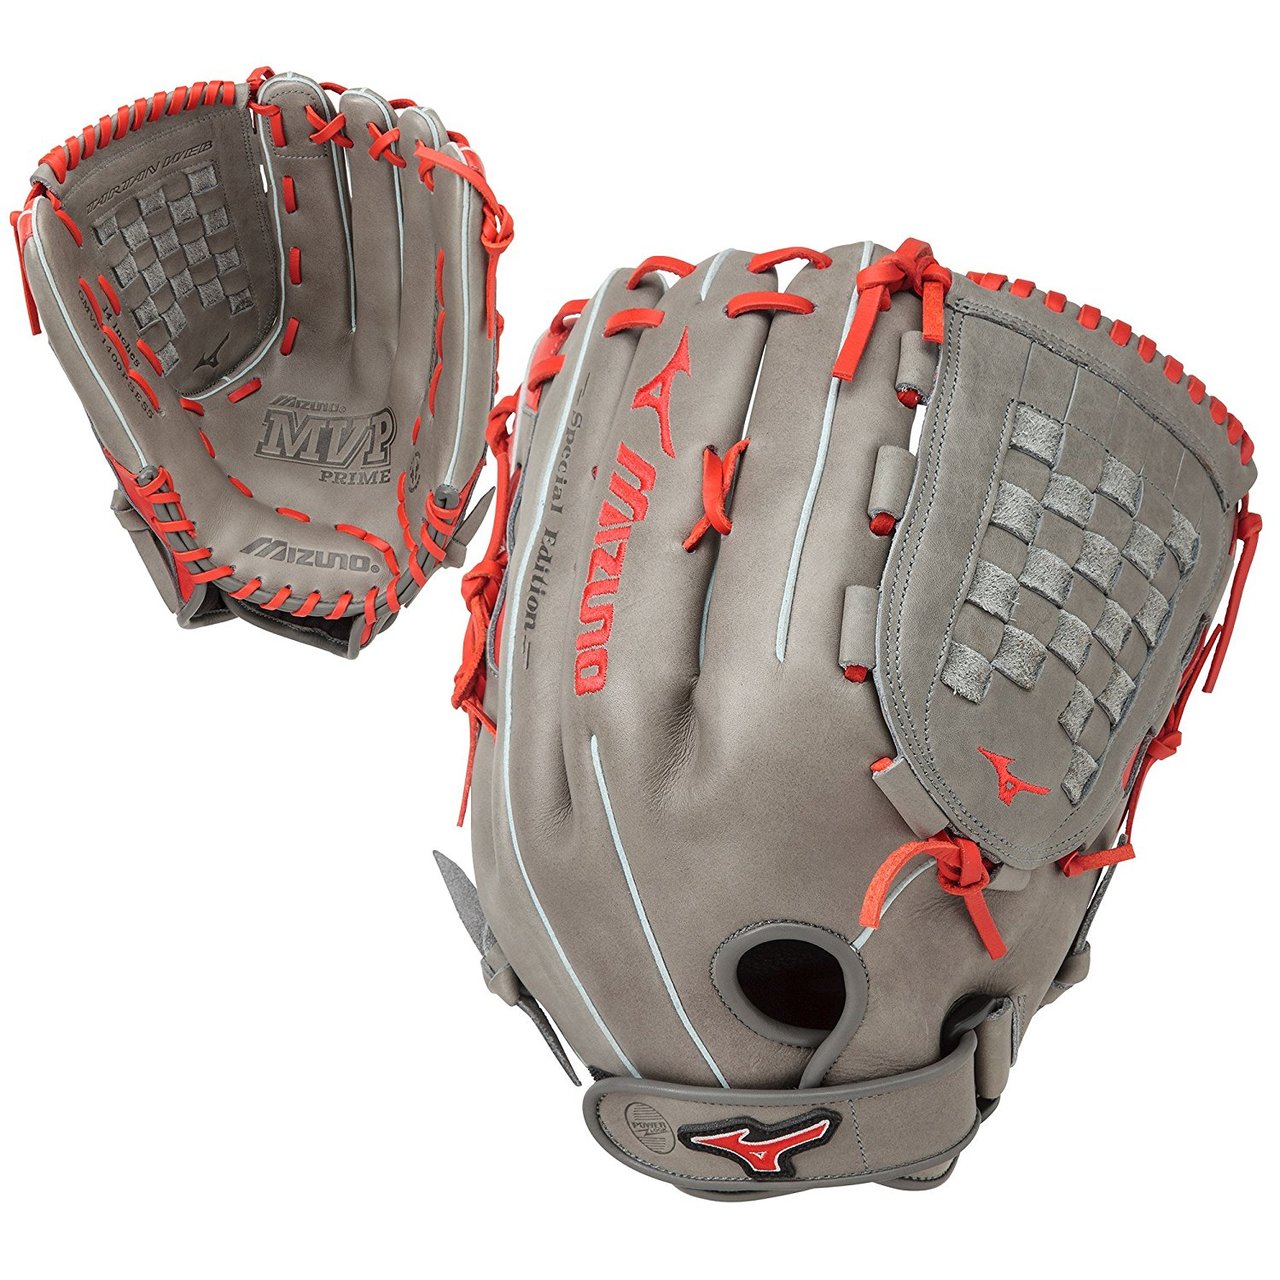 mizuno-mvp-prime-se-14-inch-gmvp1400pses5-slowpitch-glove-smoke-red-right-hand-throw GMVP1400PSES5-SMRD-RightHandThrow Mizuno 889961060182 The Special Edition MVP Prime Slowpitch Series lives up to Mizunos